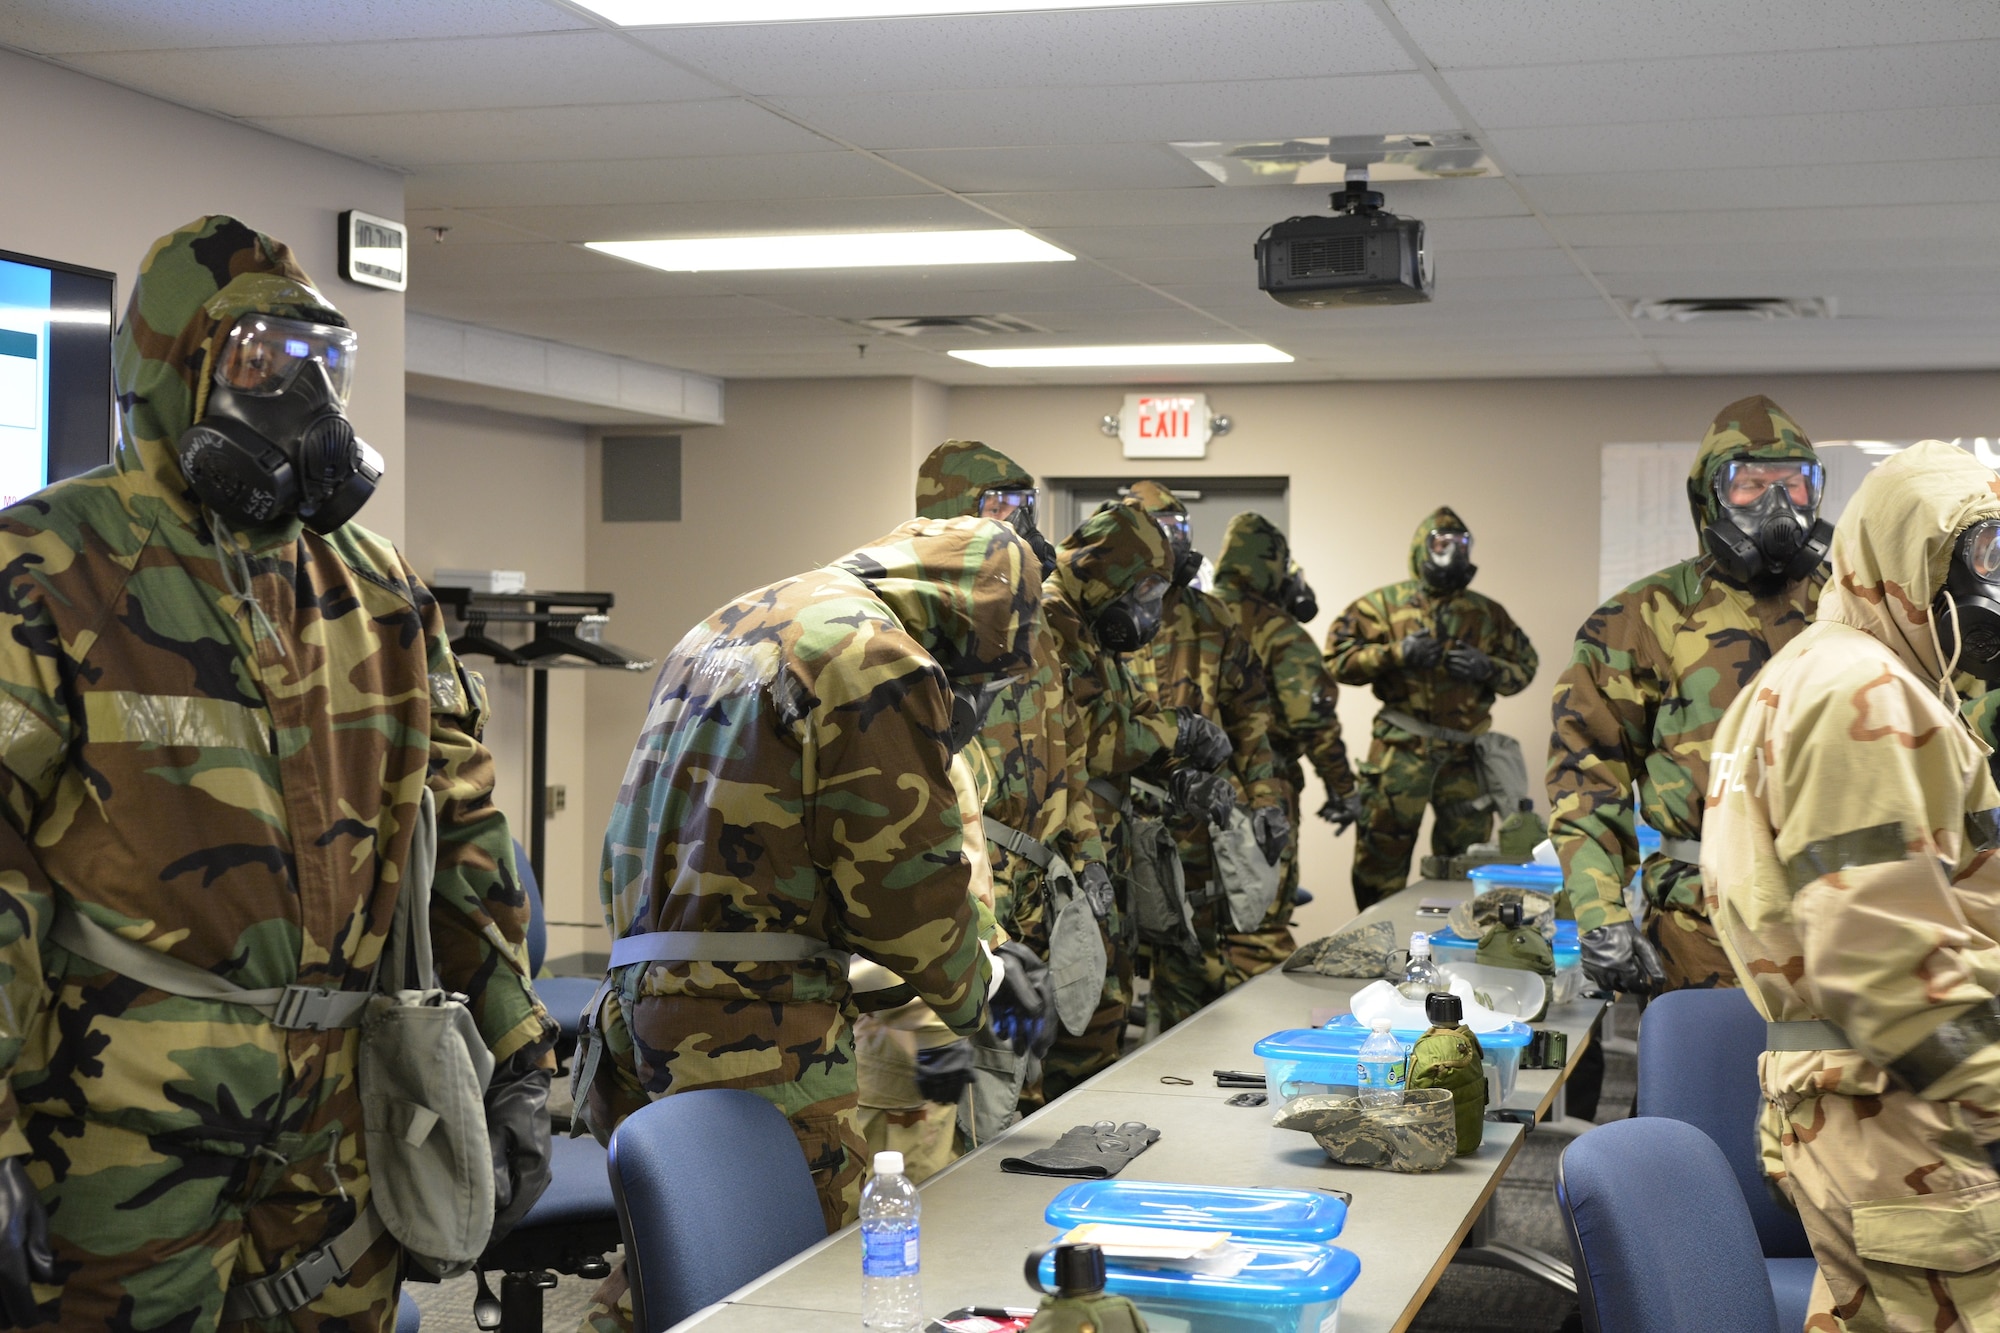 Members complete weapons qualifications in preparation for deployment at the Combat Arms Training and Maintenance facility at the 88th Security Forces Squadron on Wright-Patterson Air Force Base. (Air Force/contributed photo)